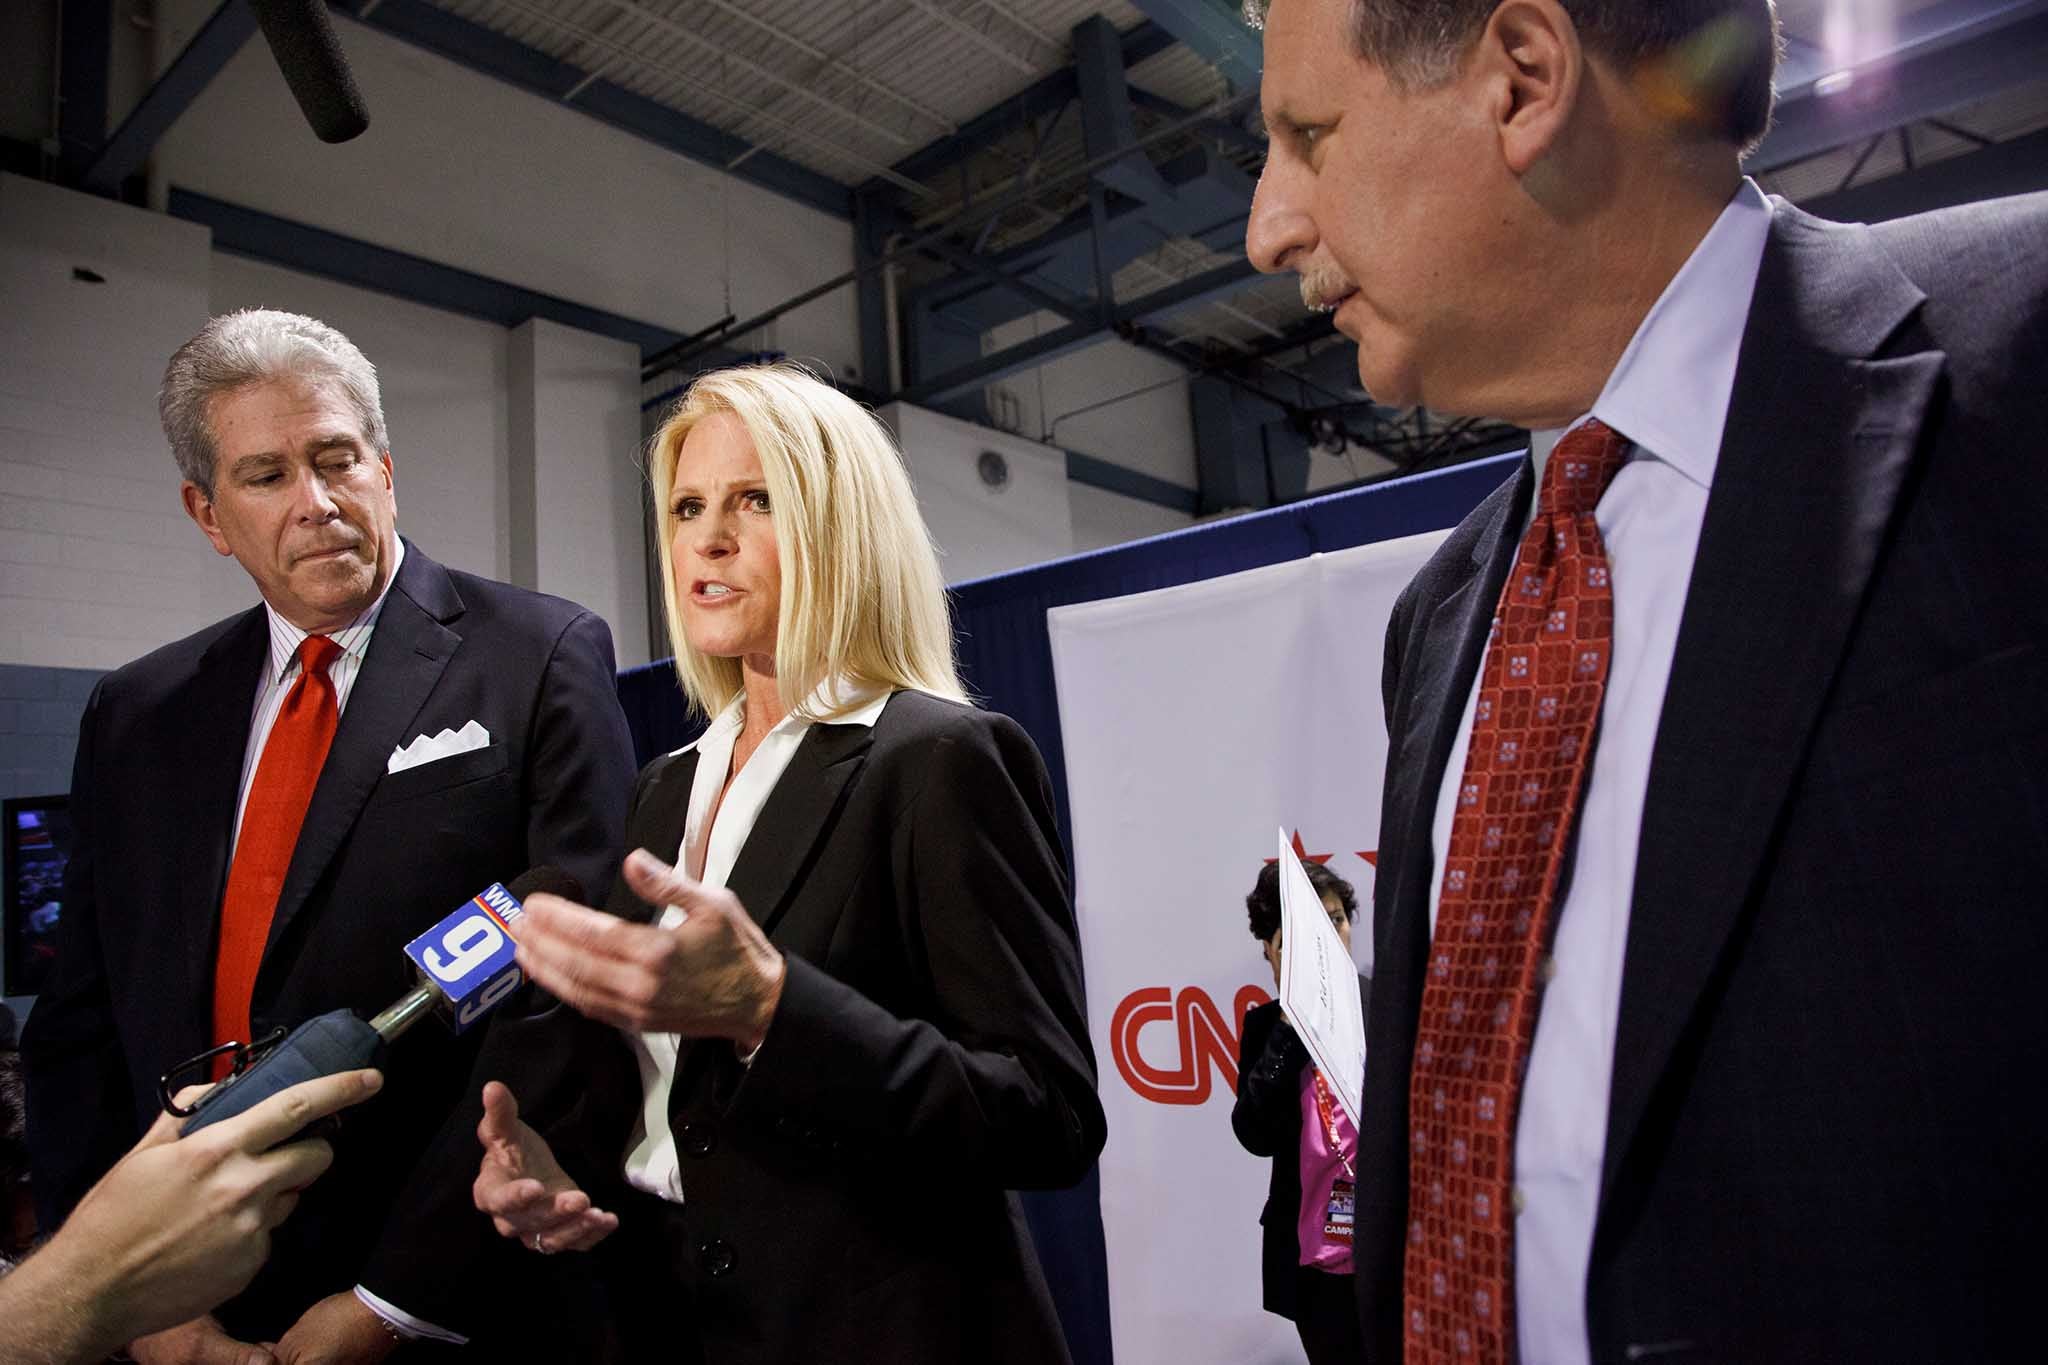 Alice Stewart (center) with Ed Goeas (left) and Bob Heckman (right) in the spin room after The New Hampshire Republican debate in 2012 when she served as Michele Bachmann’s press secretary